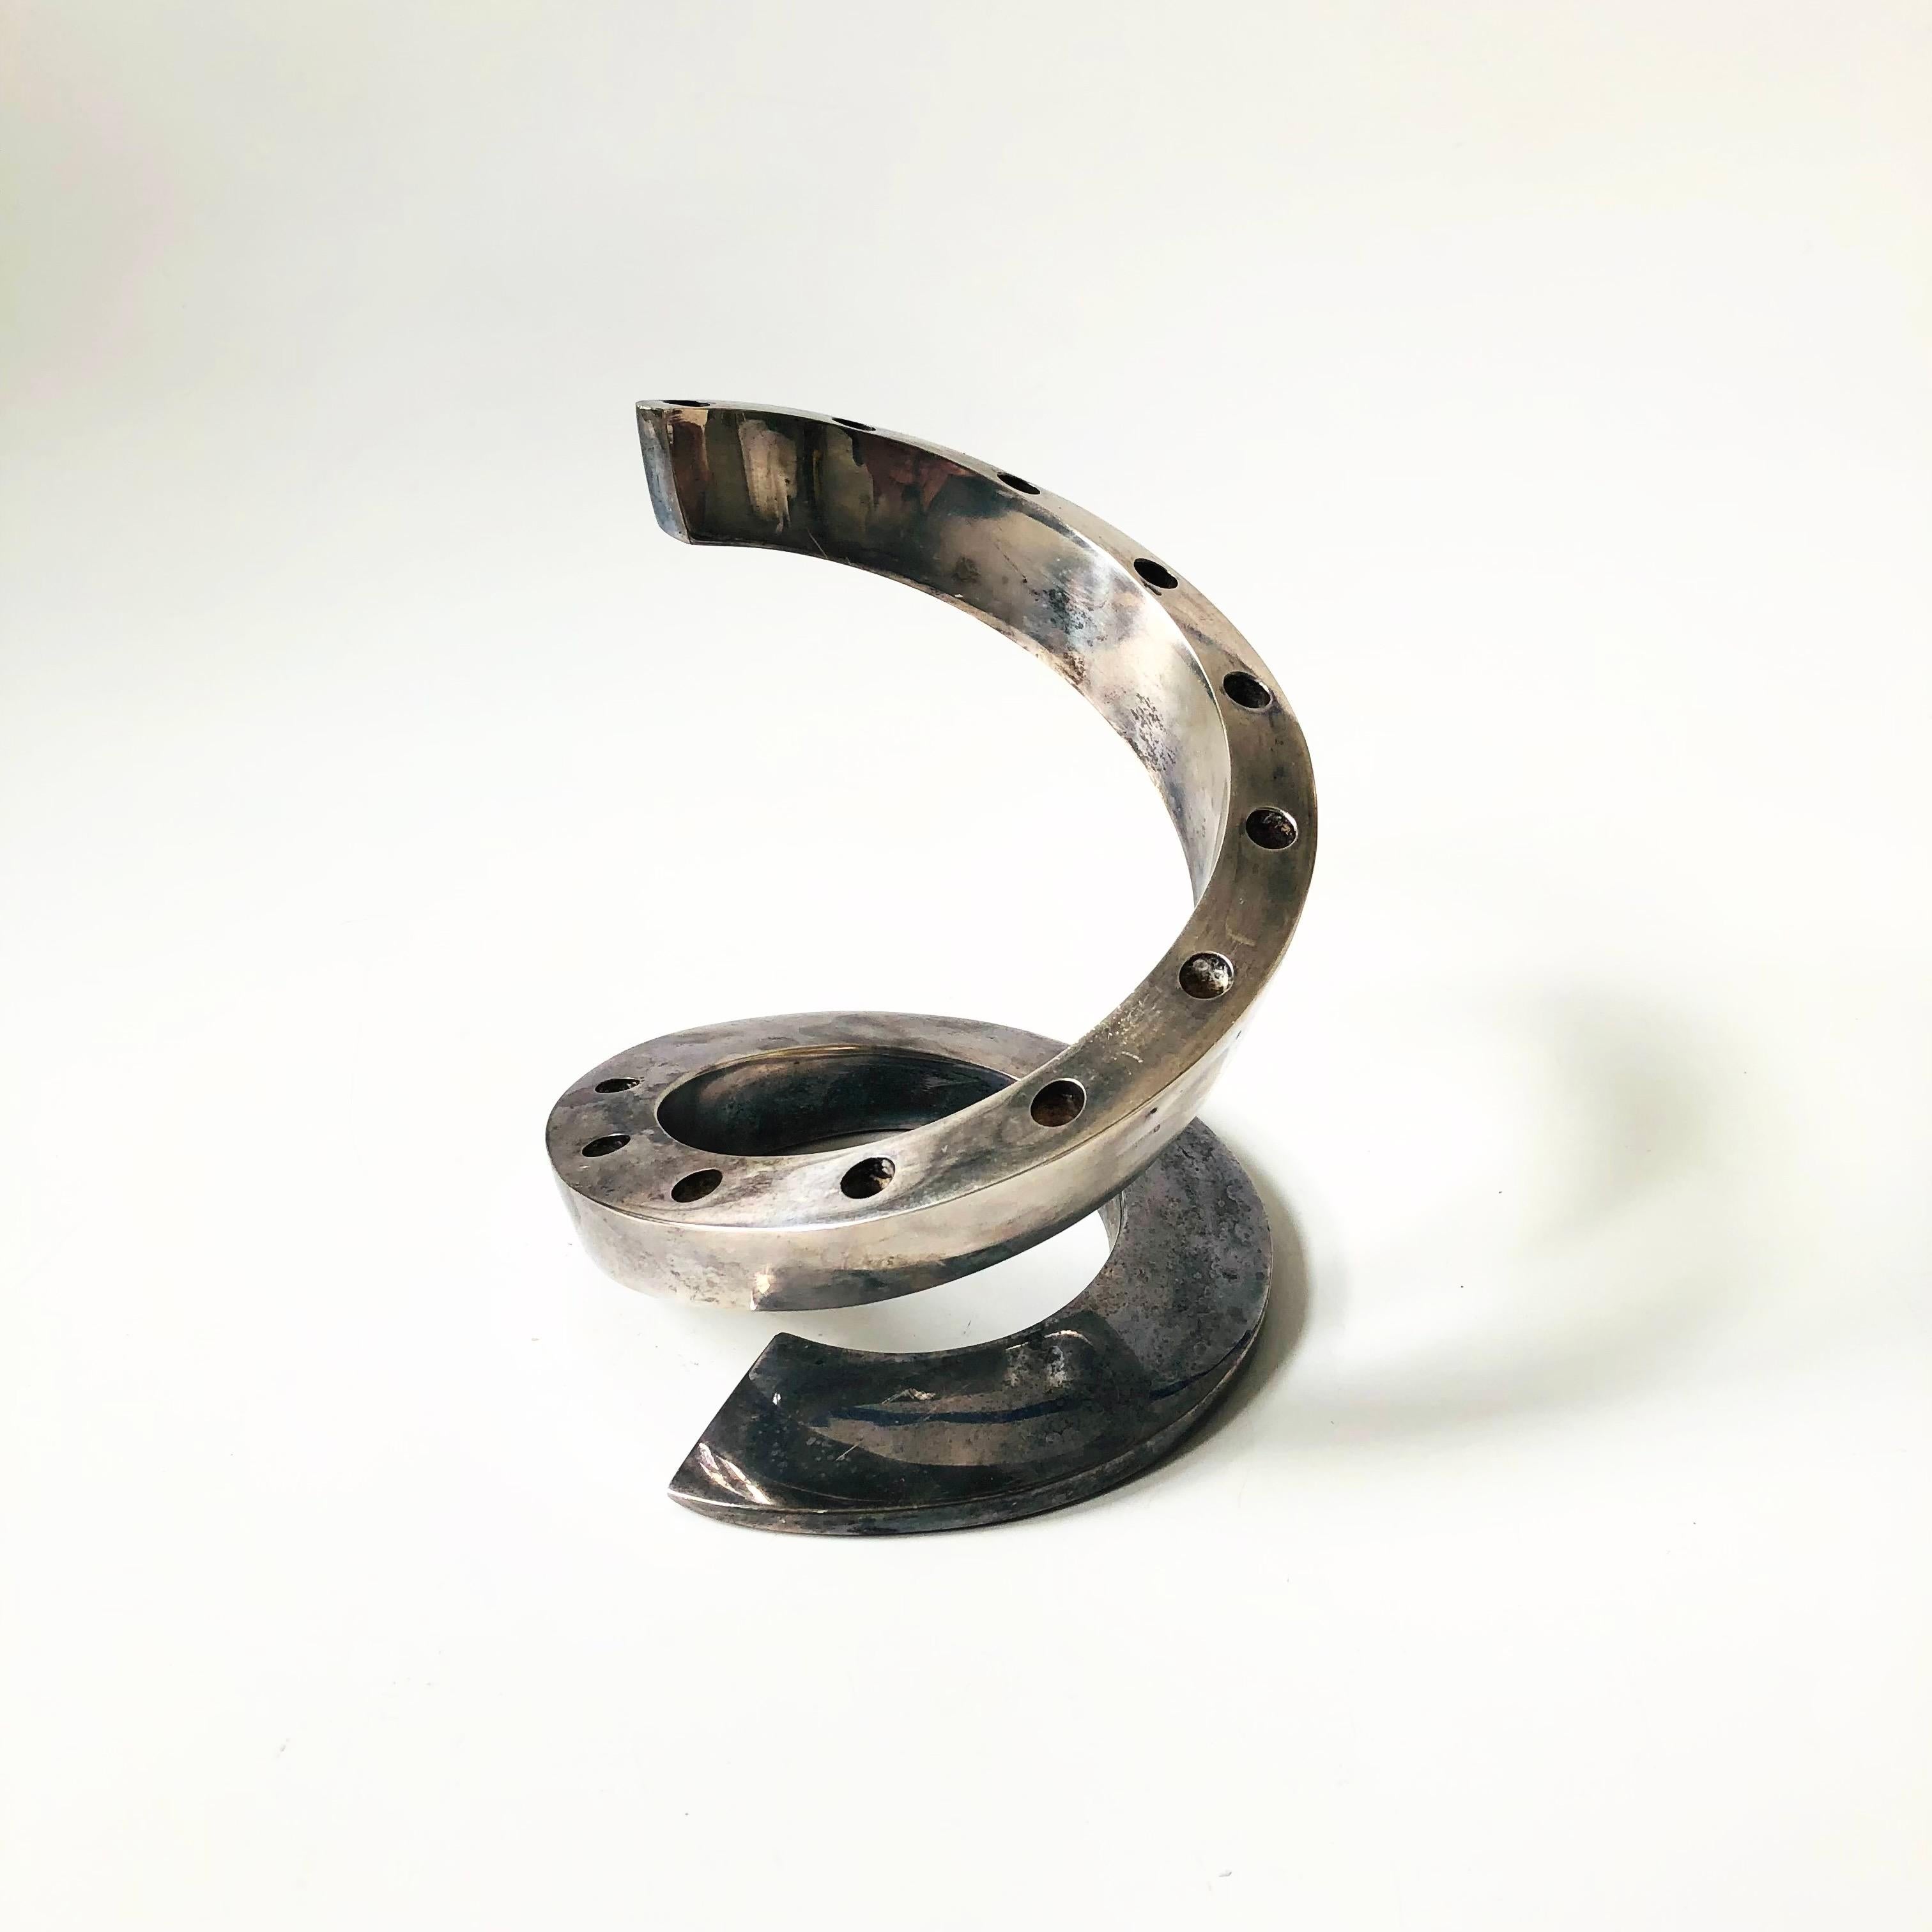 A mid century silver plate candle holder designed by Bertil Vallien for Dansk. Great sculptural spiral shape, holding up to 12 tiny taper candles. Marked 